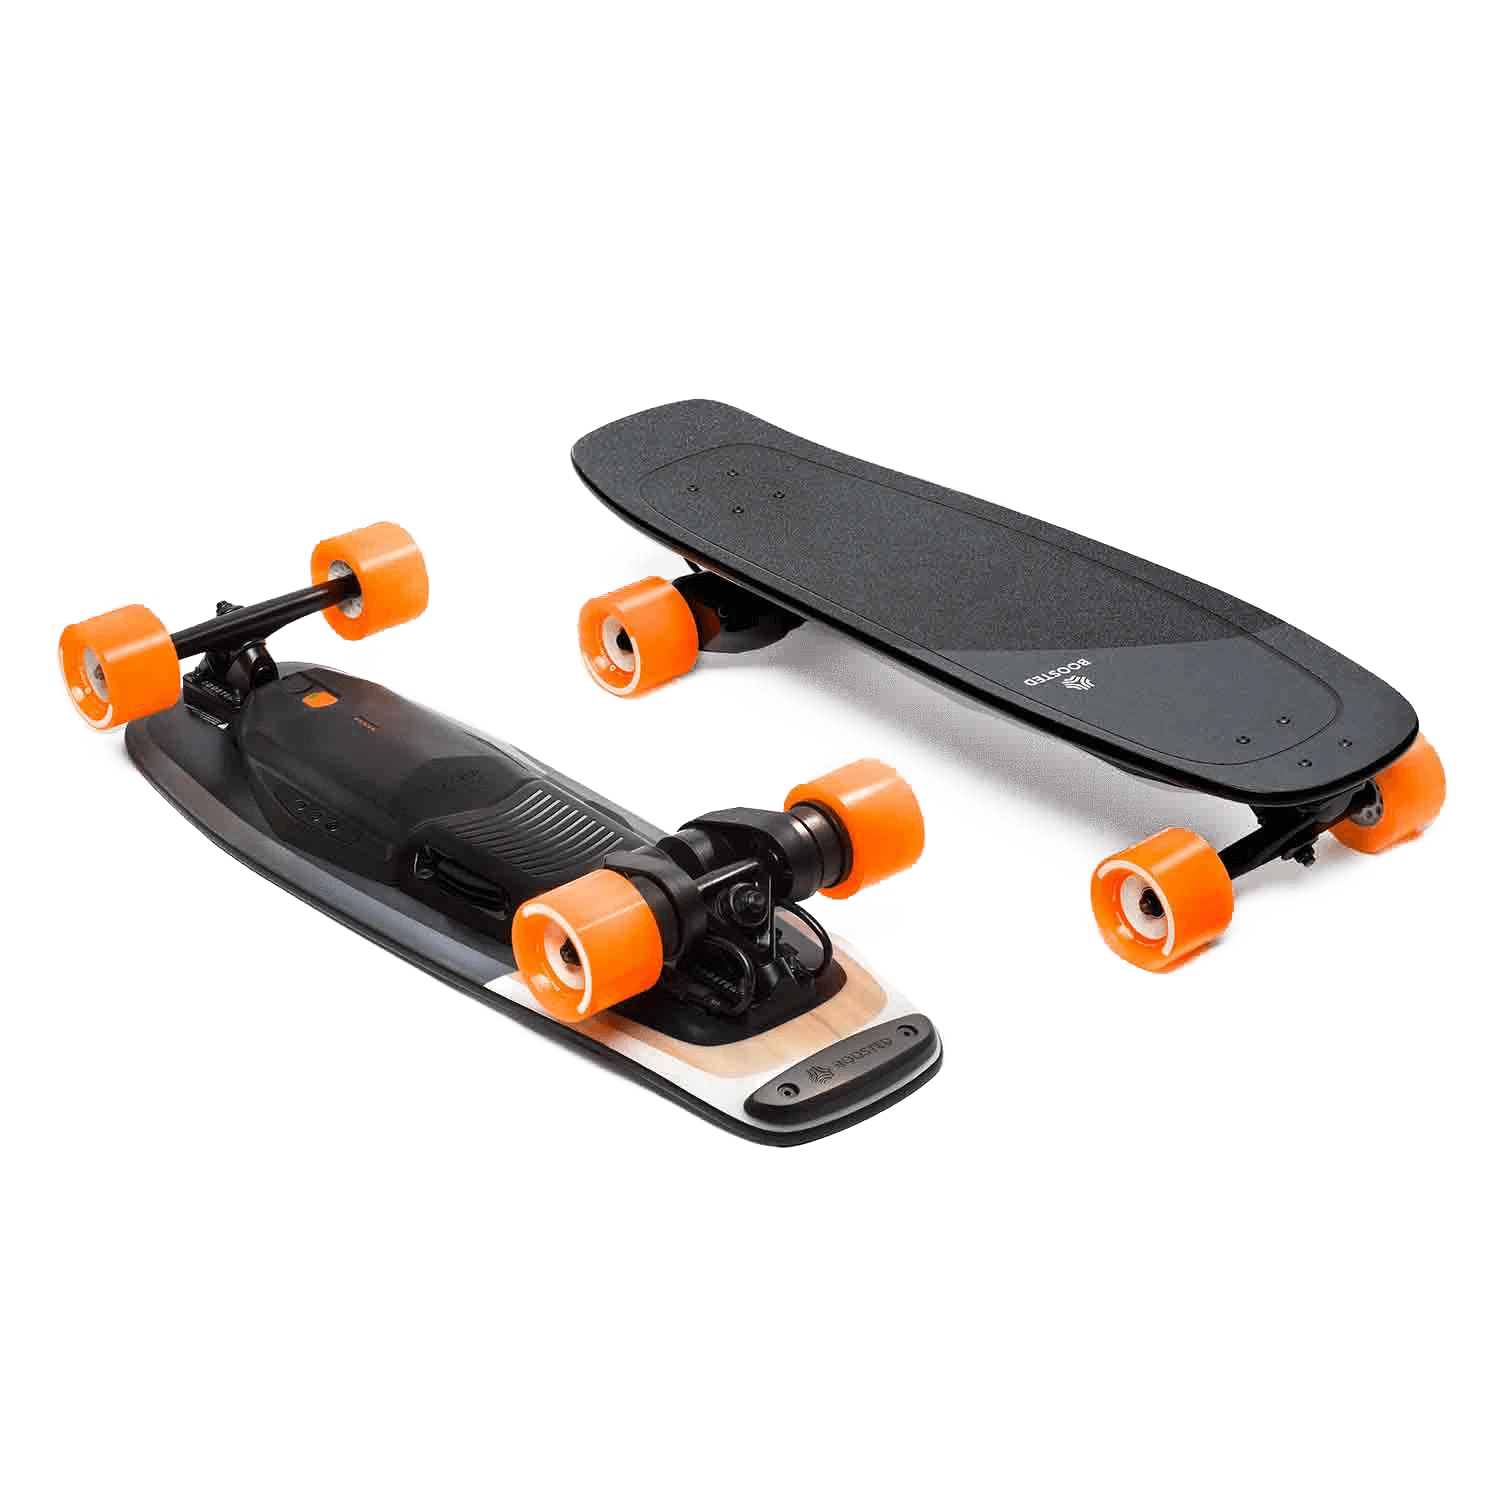 product named boosted mini s in electric skateboards